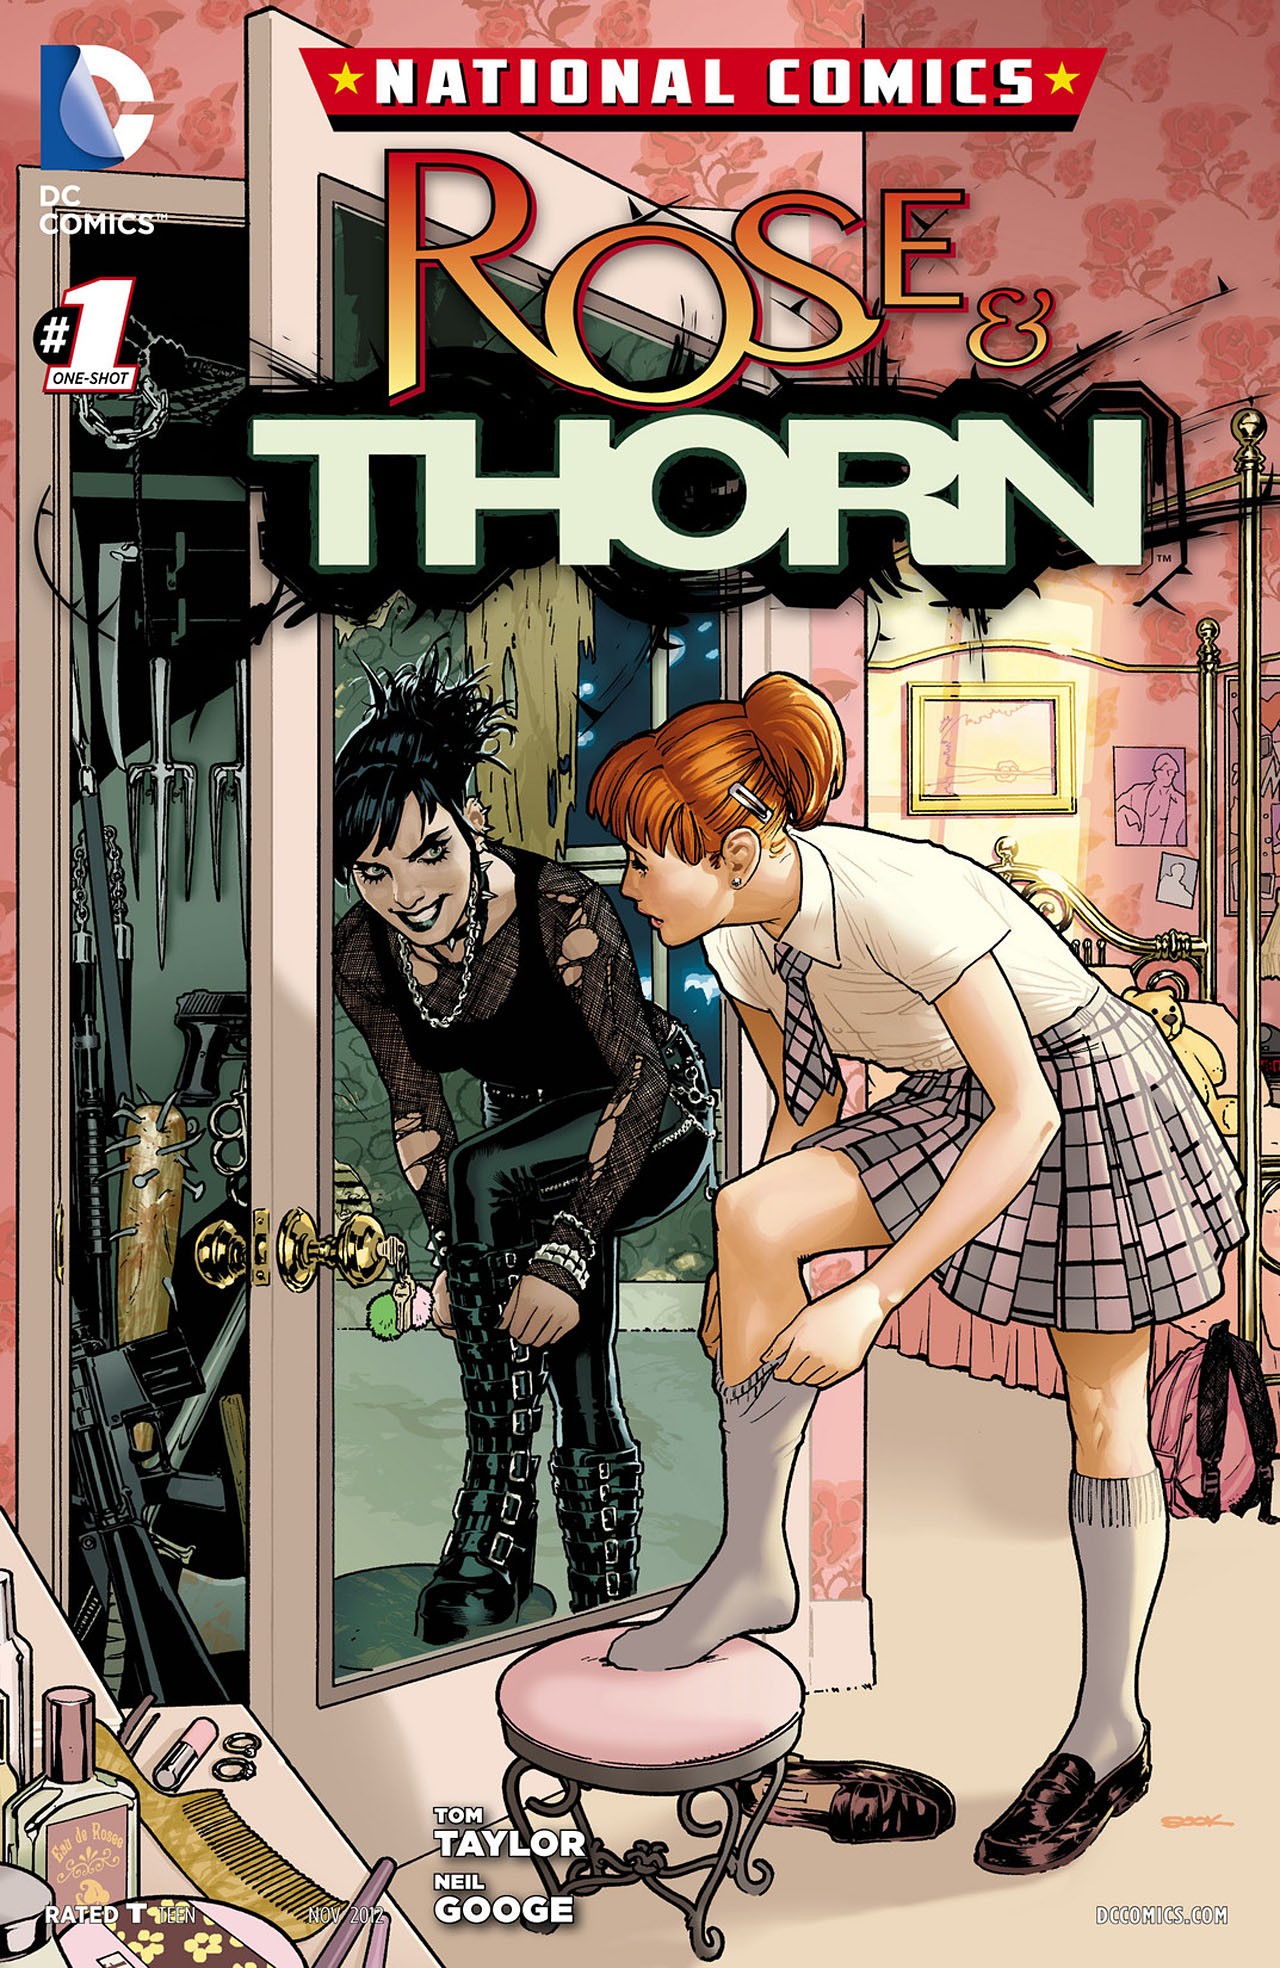 National Comics: Rose and Thorn Vol. 1 #1